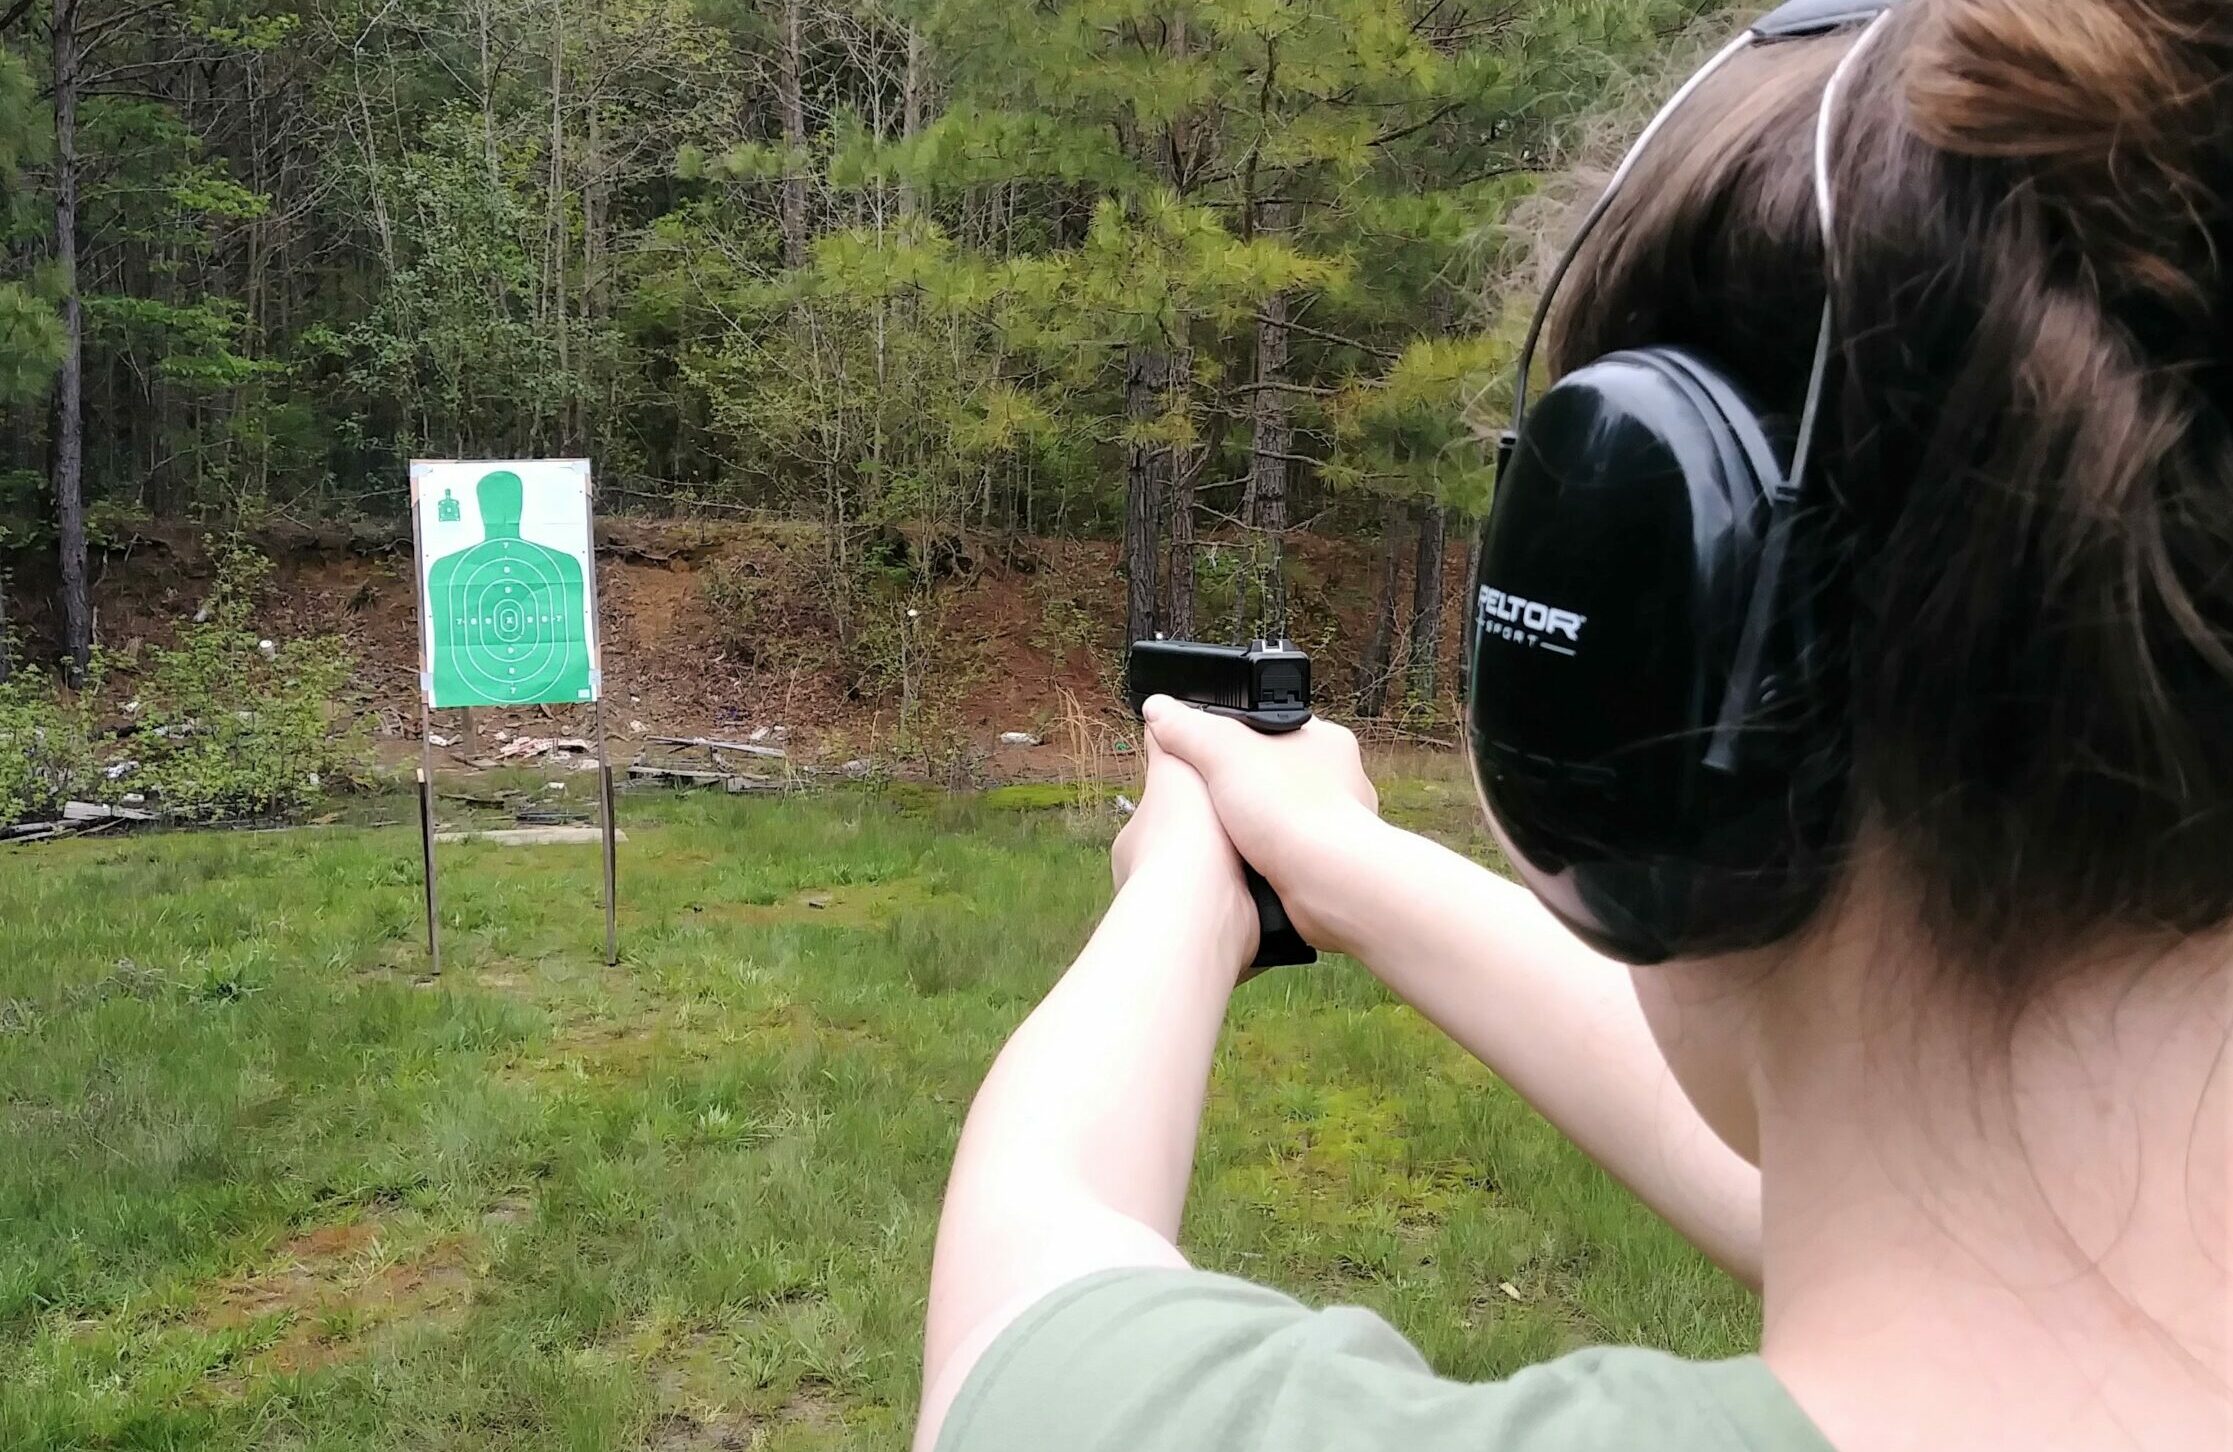 Shooting the Mozambique drill at the range